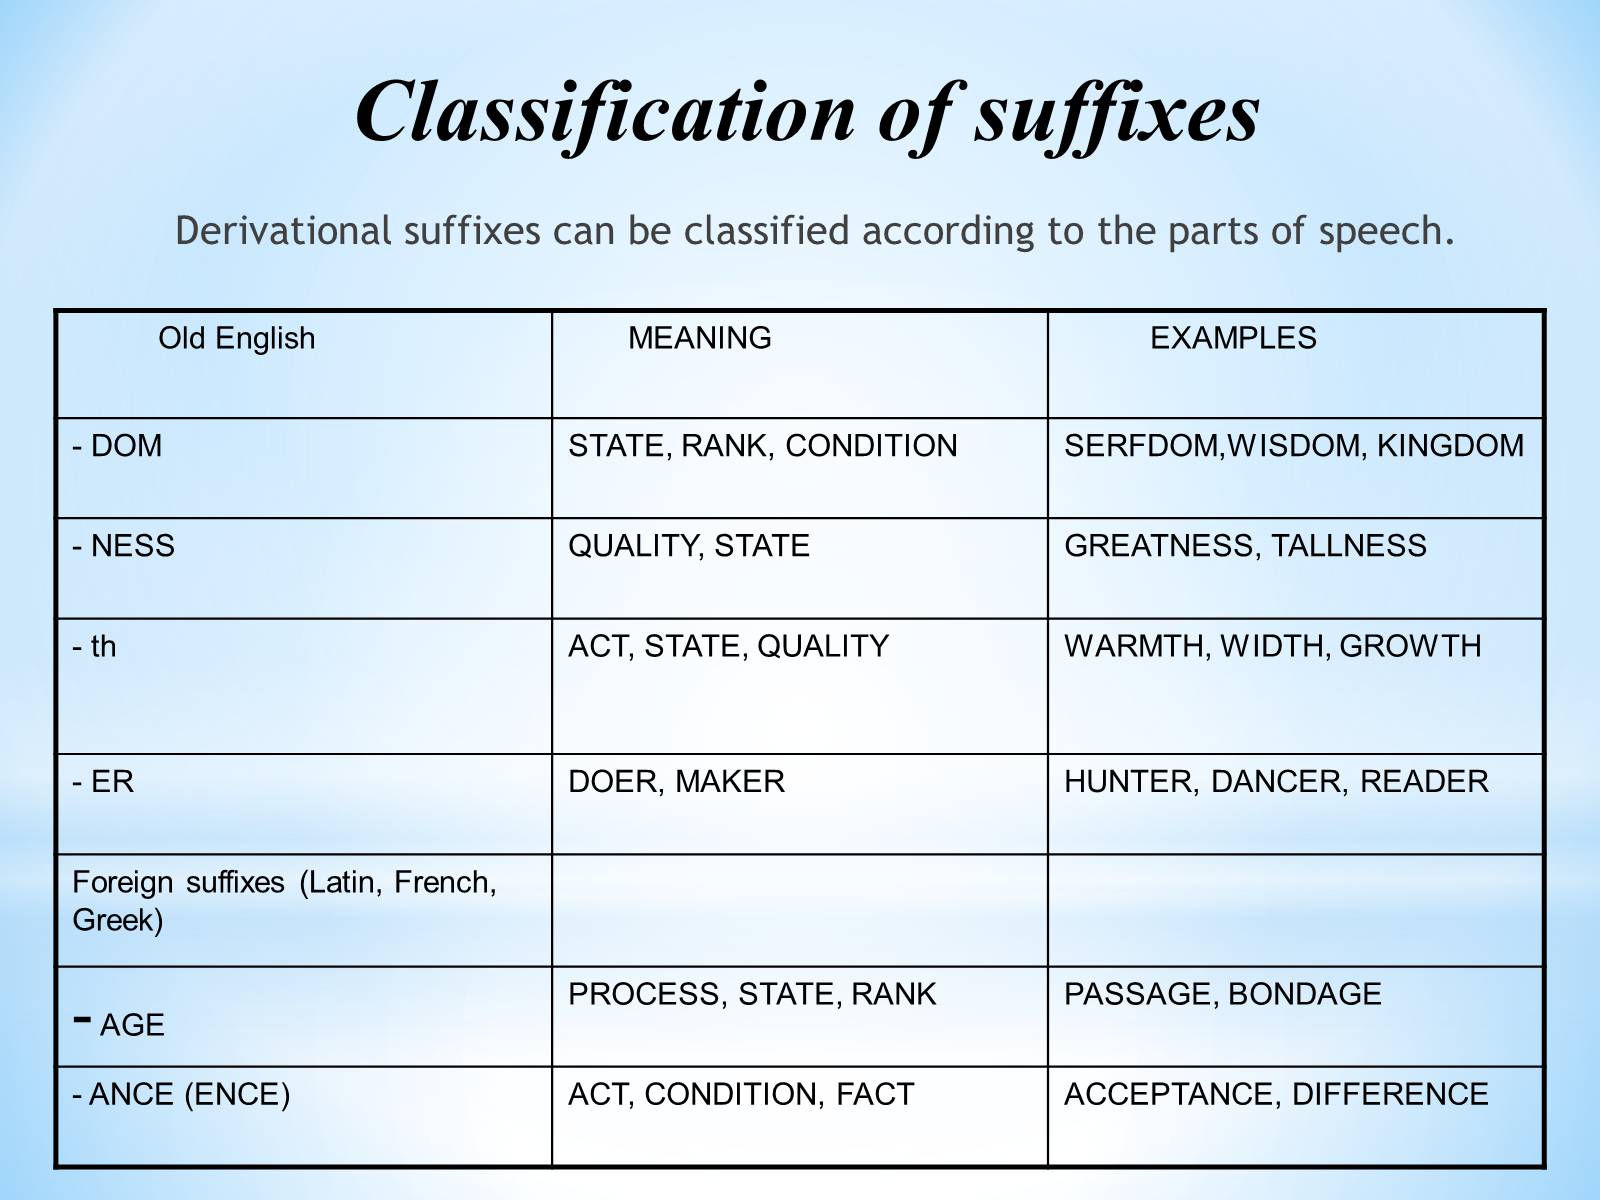 Word formation ness. Classification of suffixes. Classify суффикс. Classification of English suffixes.. Suffixation. Classification of suffixes..